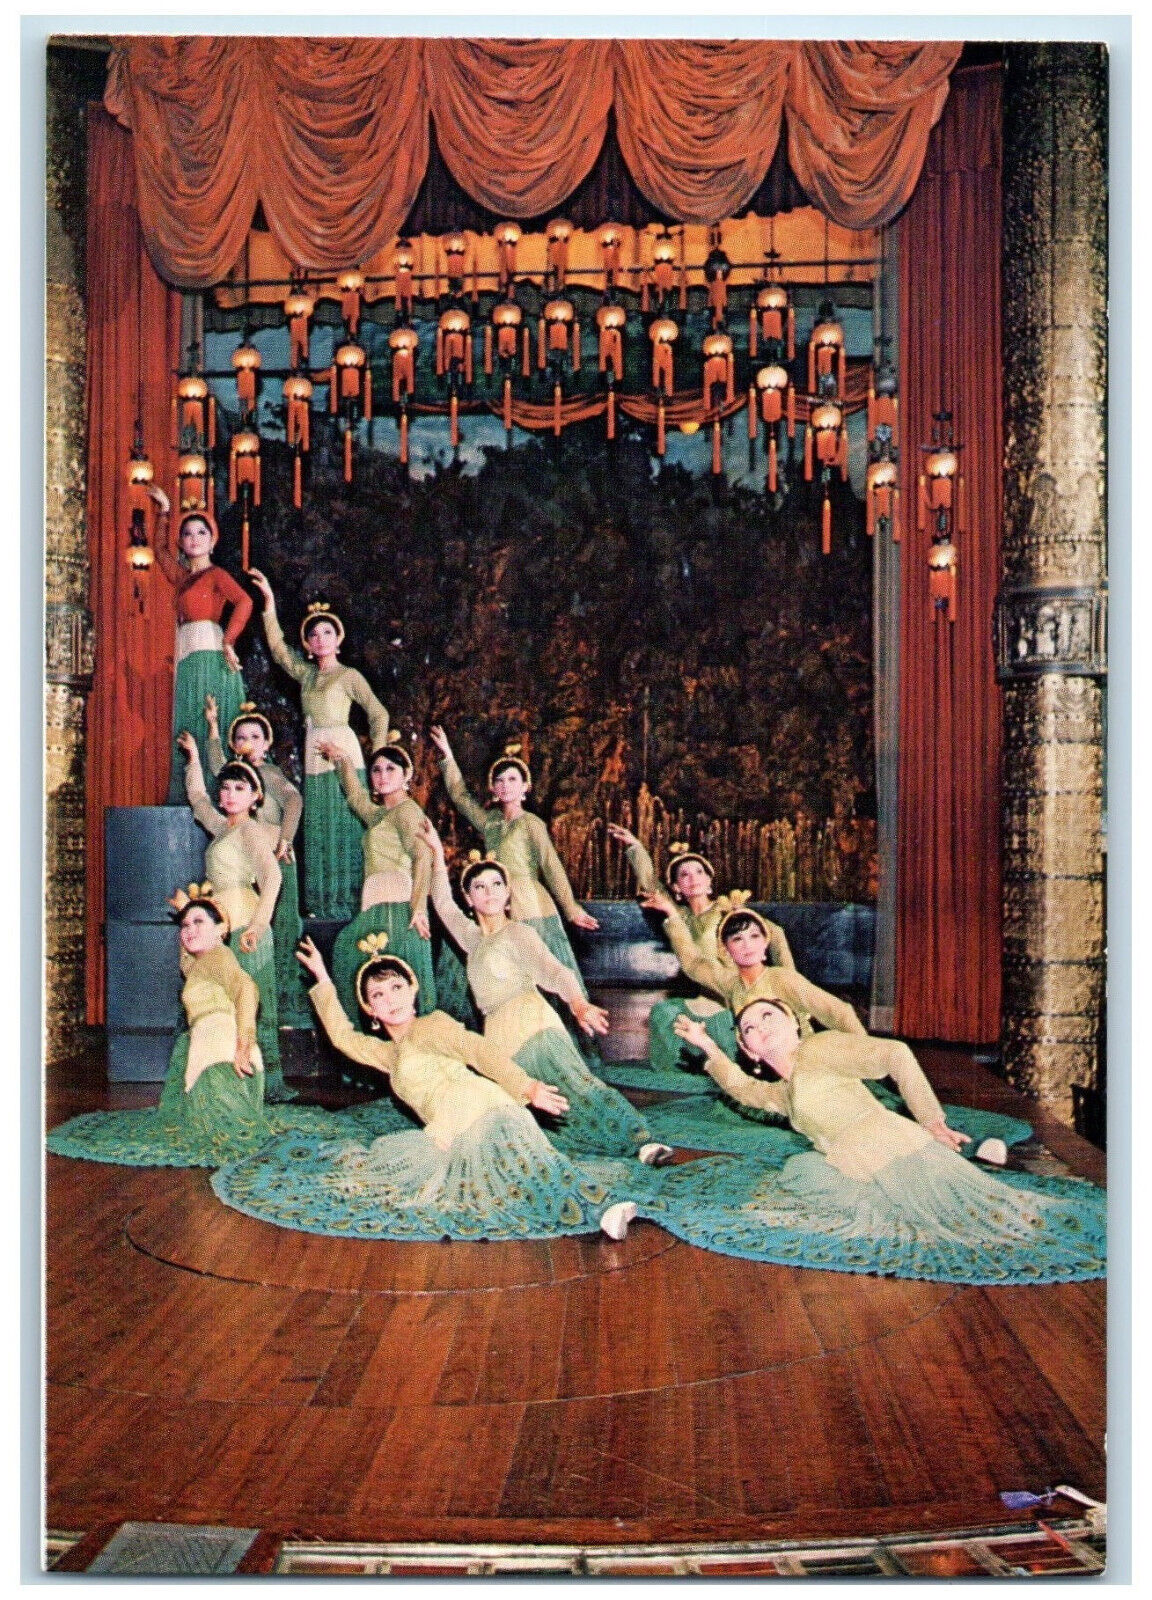 c1960's In China Peacock Dance Peacock Symbolizes Beauty Happiness Postcard